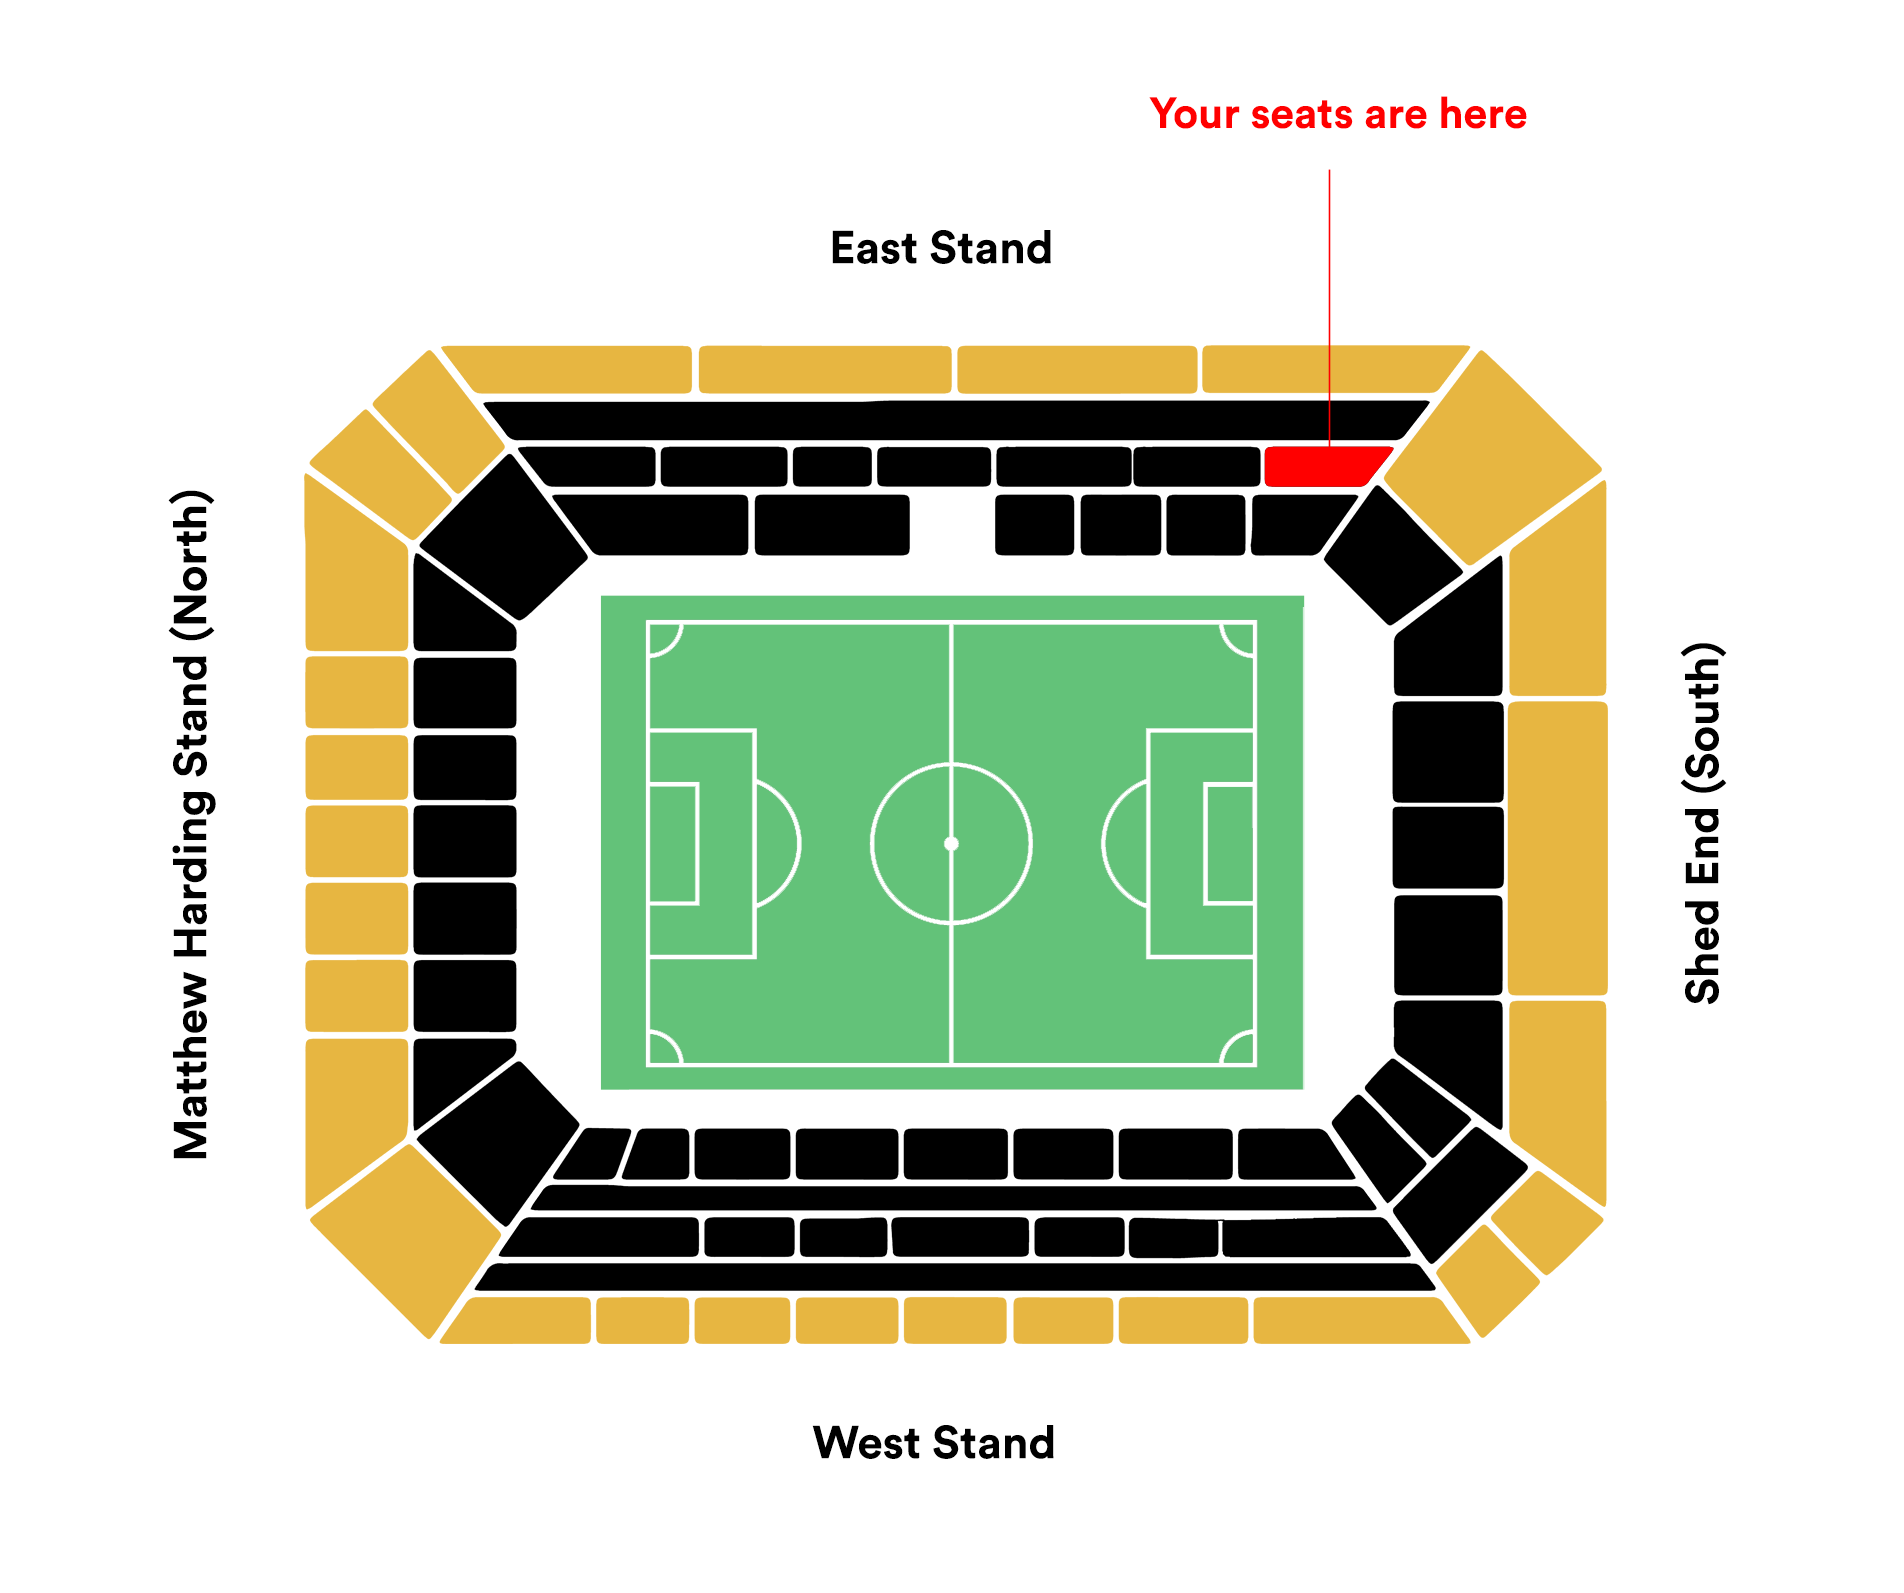 Seatmap for East Stand with Captains Bar